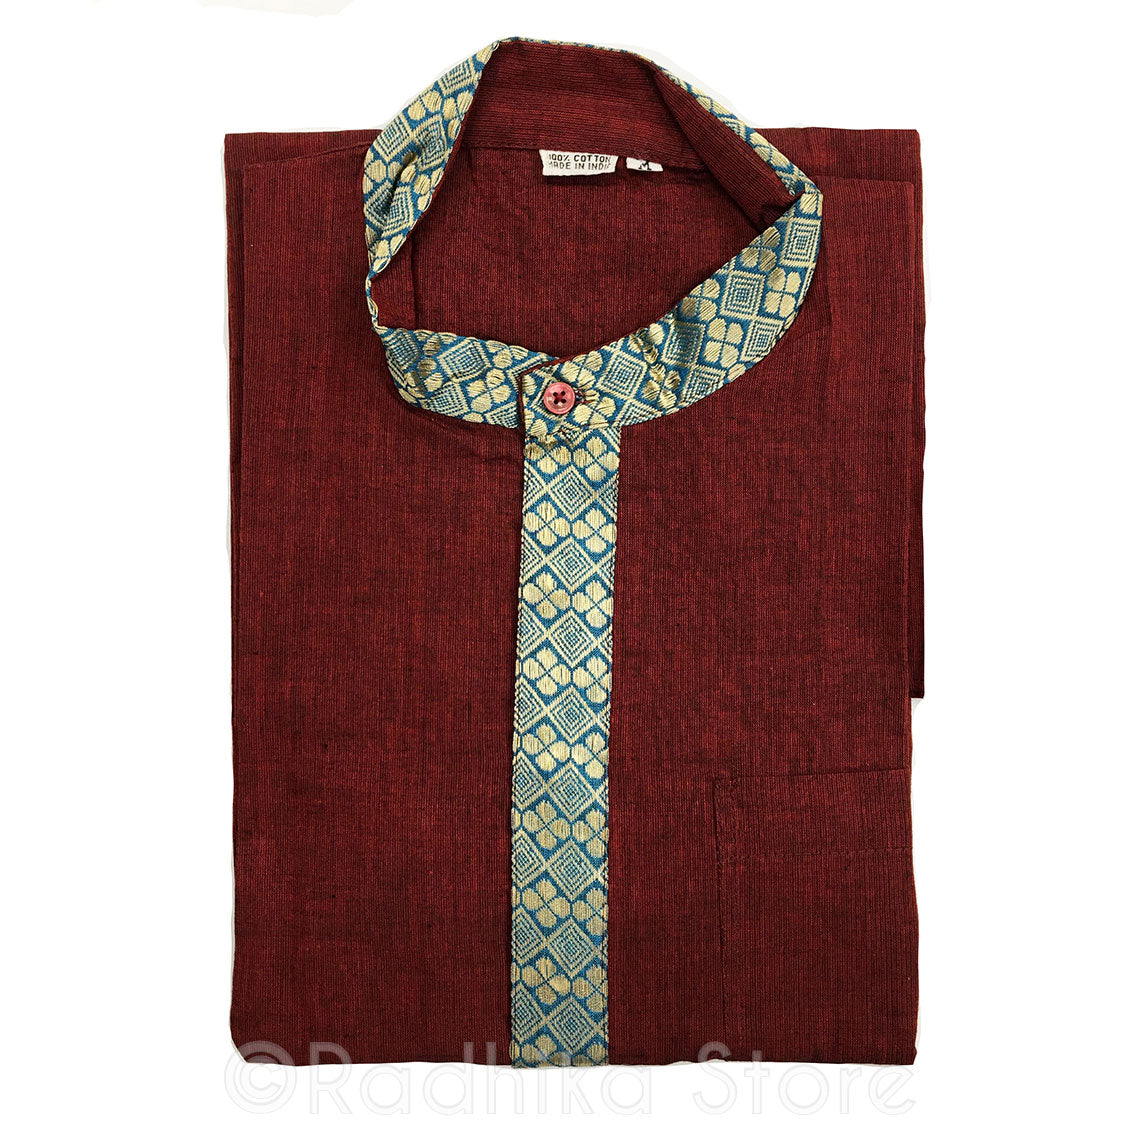 Maroon Kurtas - With Beige/Gold and Teal Blue Trim